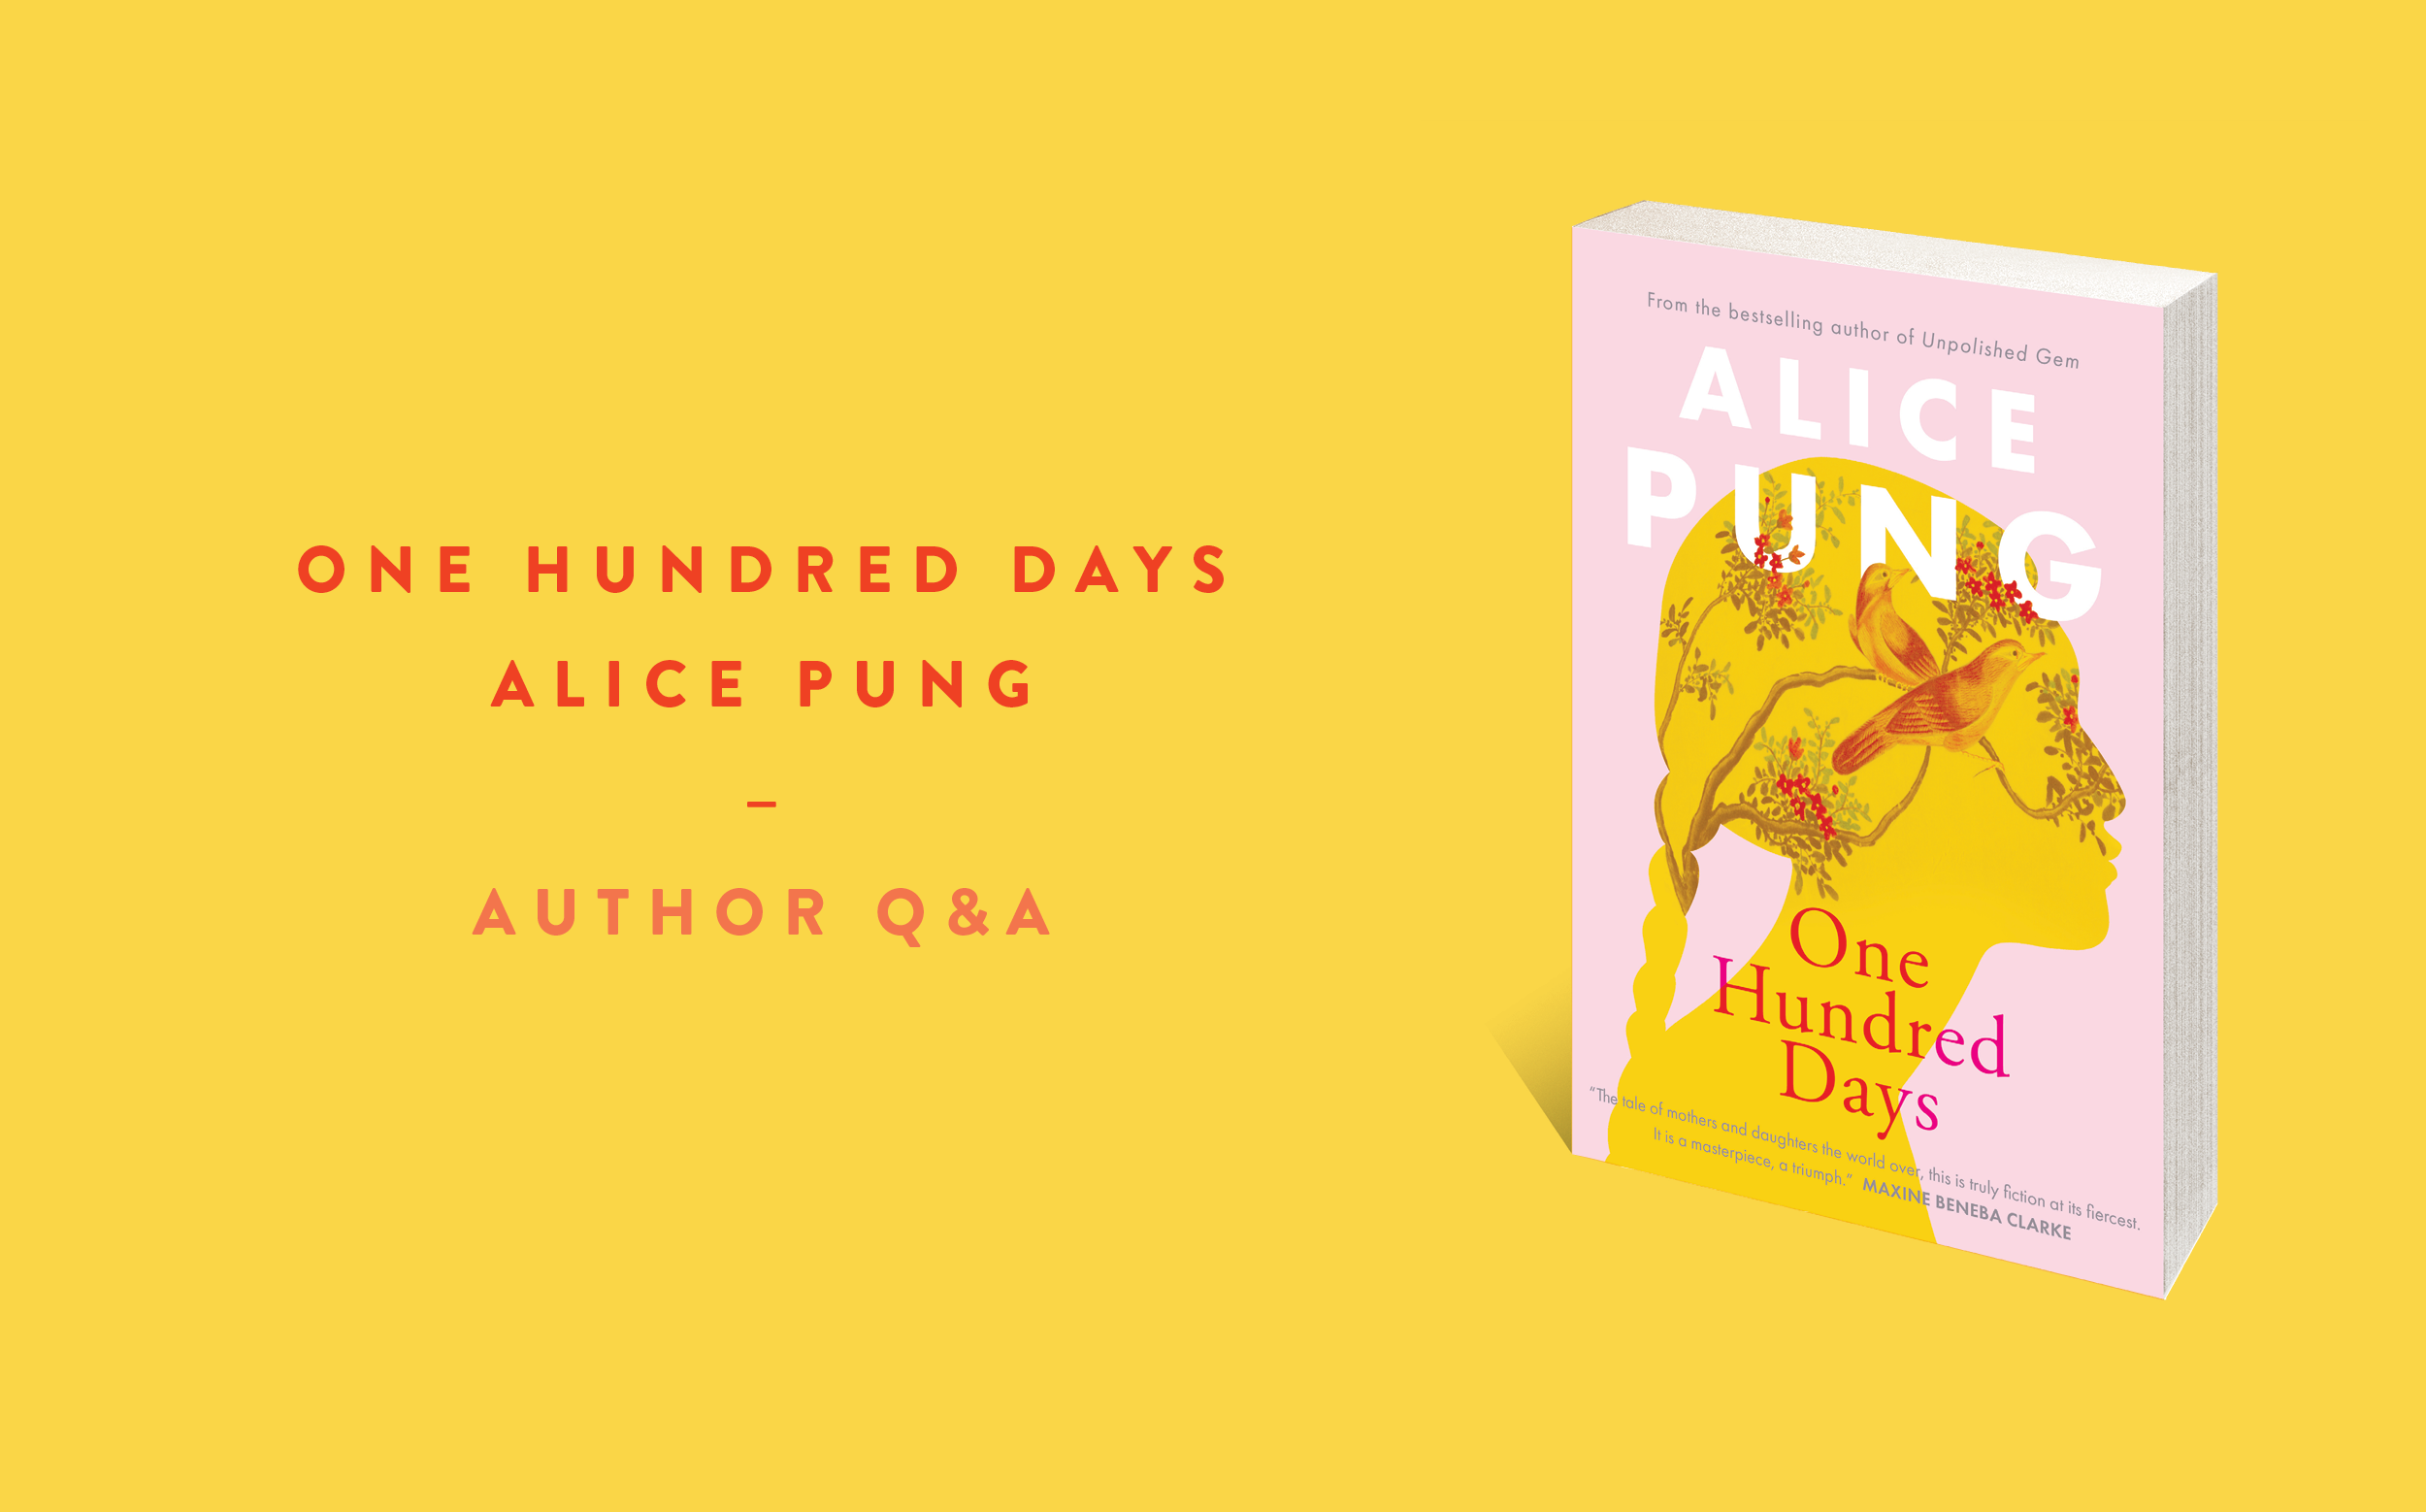 Author Q&A: Alice Pung on One Hundred Days